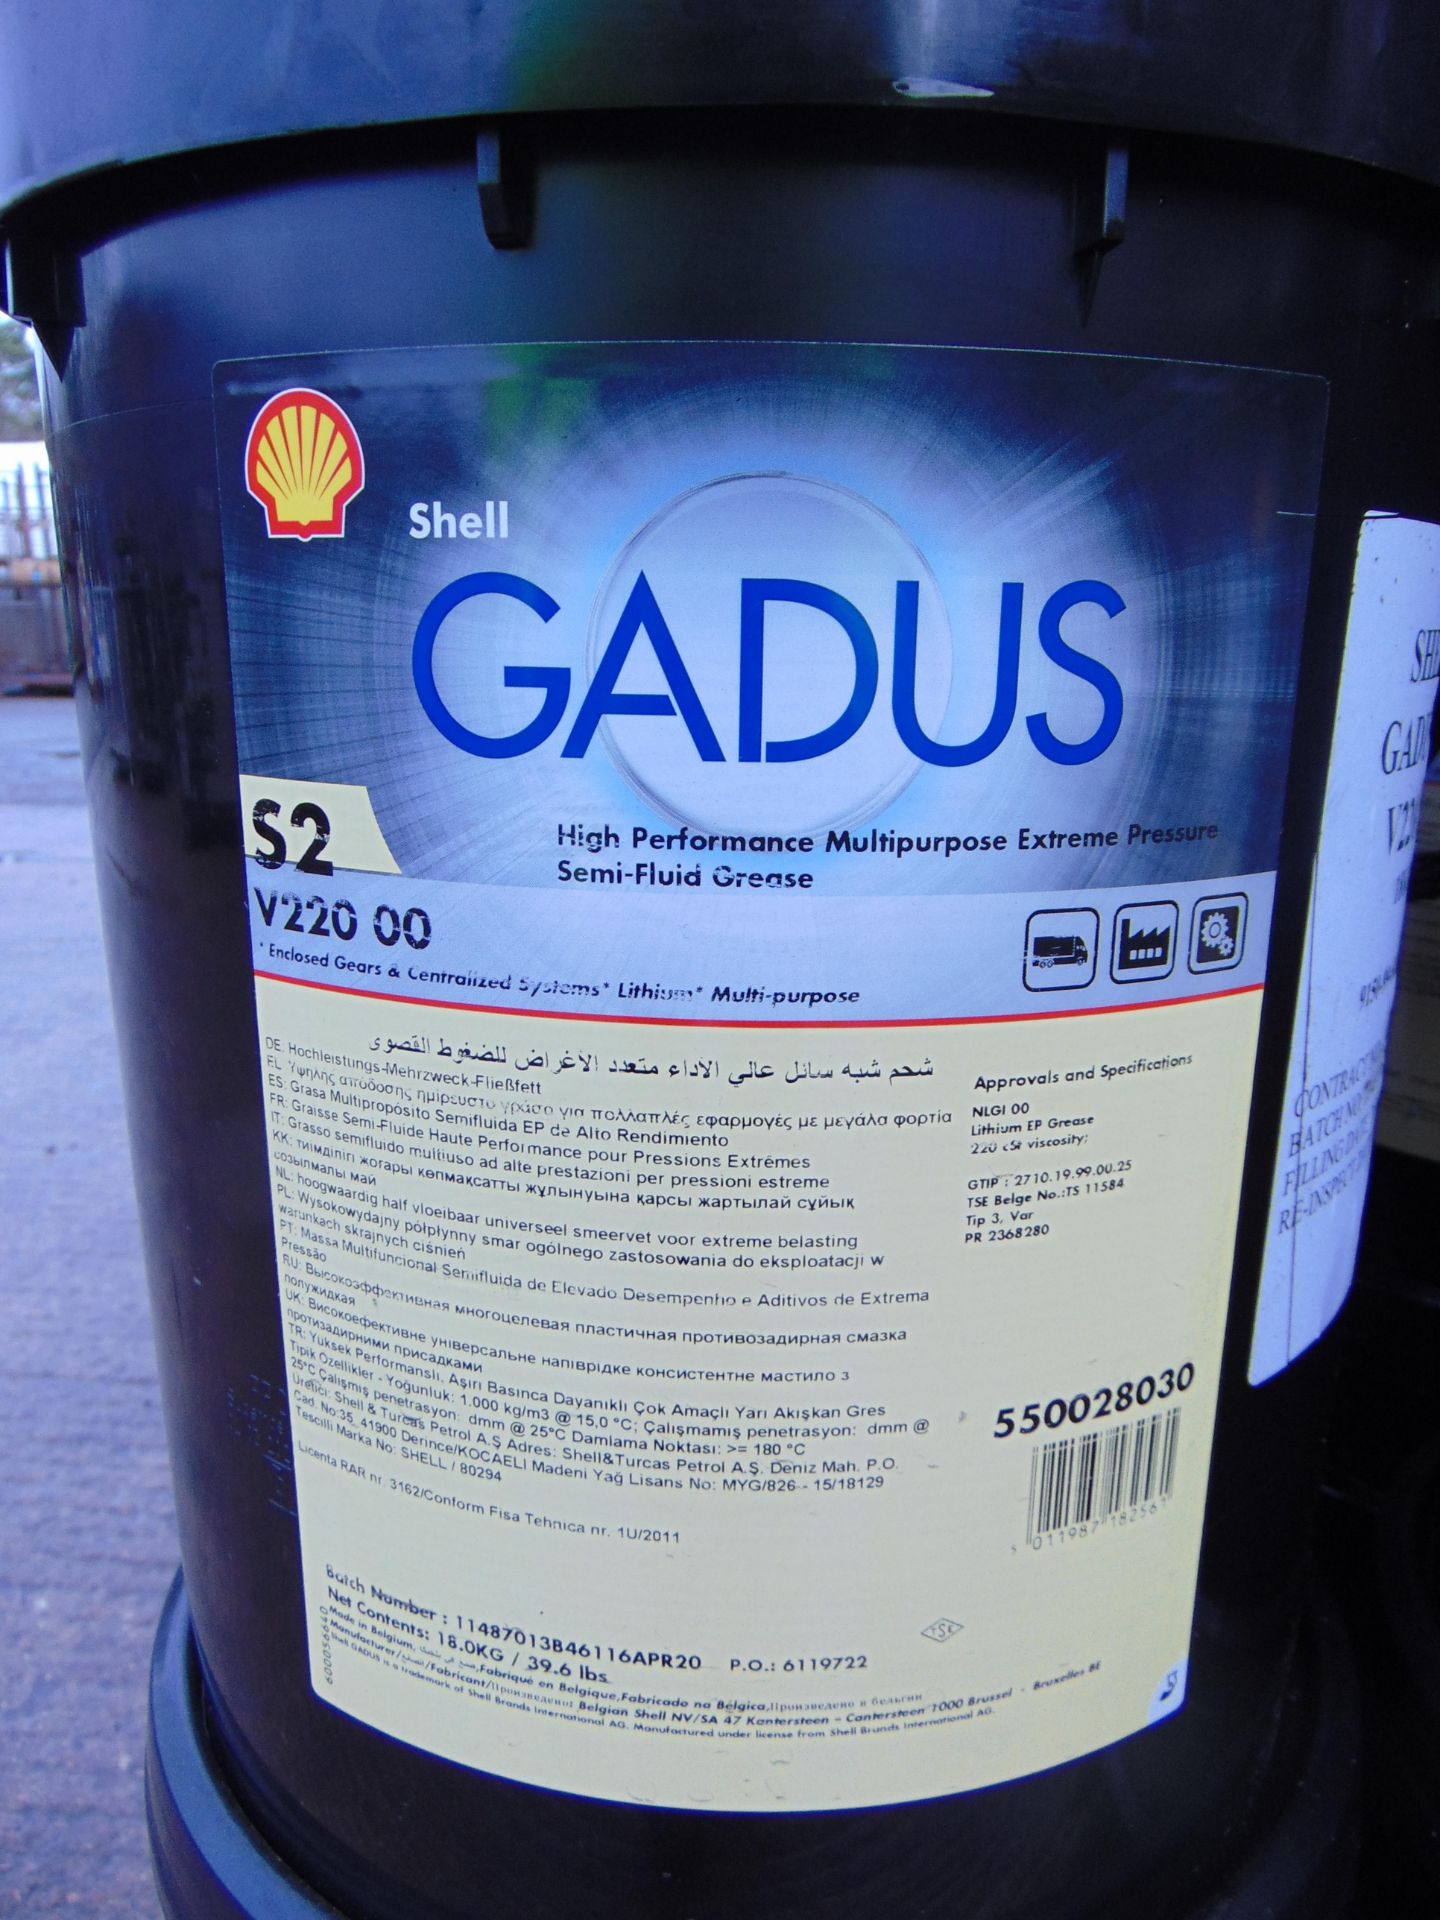 10 x 18Kg Drums of Shell Gadus S2 V220-00 - Image 2 of 3